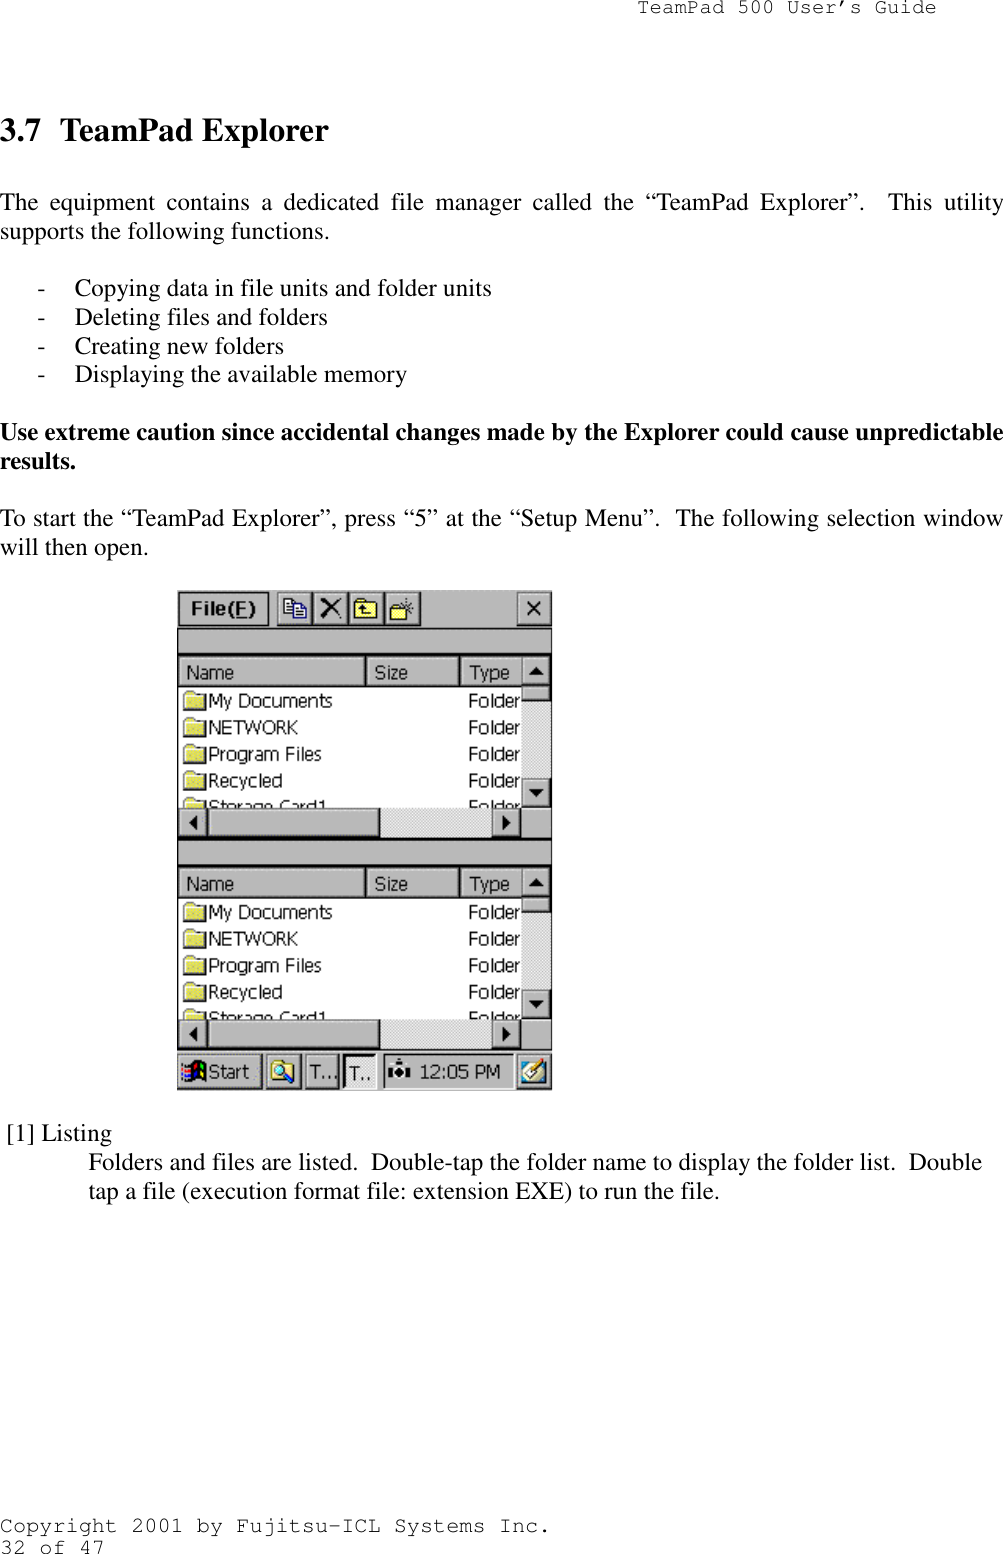                TeamPad 500 User’s GuideCopyright 2001 by Fujitsu-ICL Systems Inc.32 of 473.7 TeamPad ExplorerThe equipment contains a dedicated file manager called the “TeamPad Explorer”.  This utilitysupports the following functions.- Copying data in file units and folder units- Deleting files and folders- Creating new folders- Displaying the available memoryUse extreme caution since accidental changes made by the Explorer could cause unpredictableresults.To start the “TeamPad Explorer”, press “5” at the “Setup Menu”.  The following selection windowwill then open. [1] ListingFolders and files are listed.  Double-tap the folder name to display the folder list.  Doubletap a file (execution format file: extension EXE) to run the file.